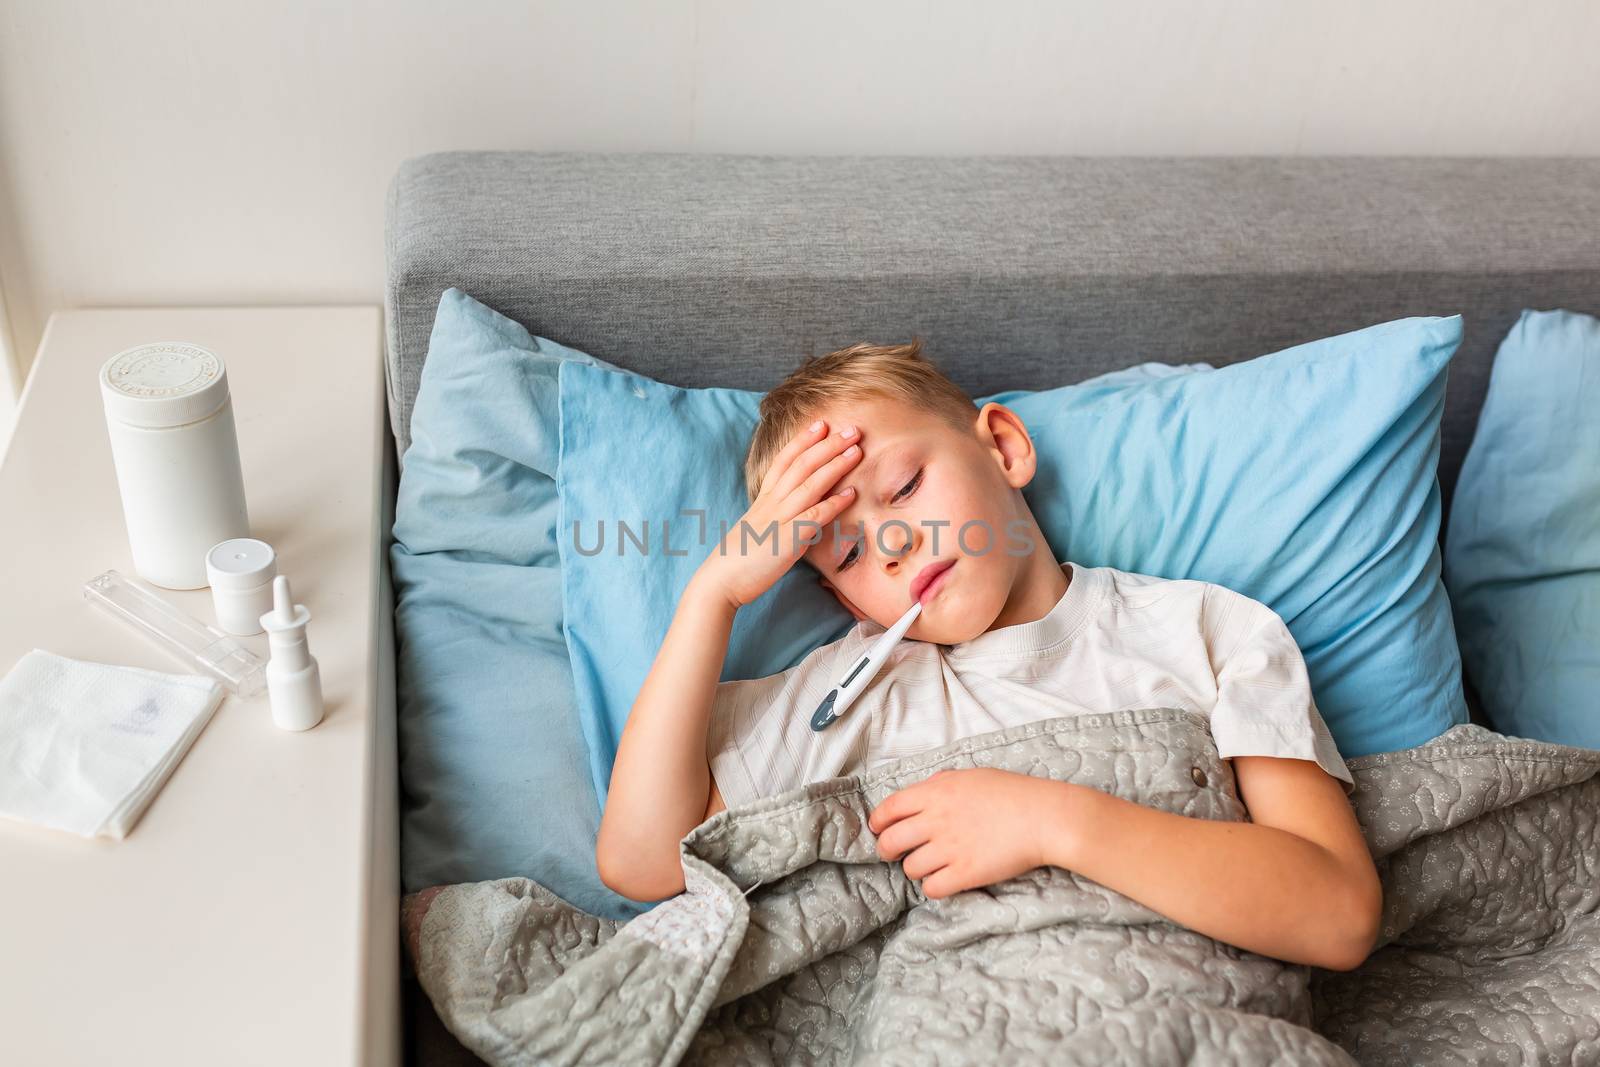 Sick little boy with high fever and headache laying in bed and holding thermometer in his mouth. Stay at home during corona virus epidemic if you feel sick